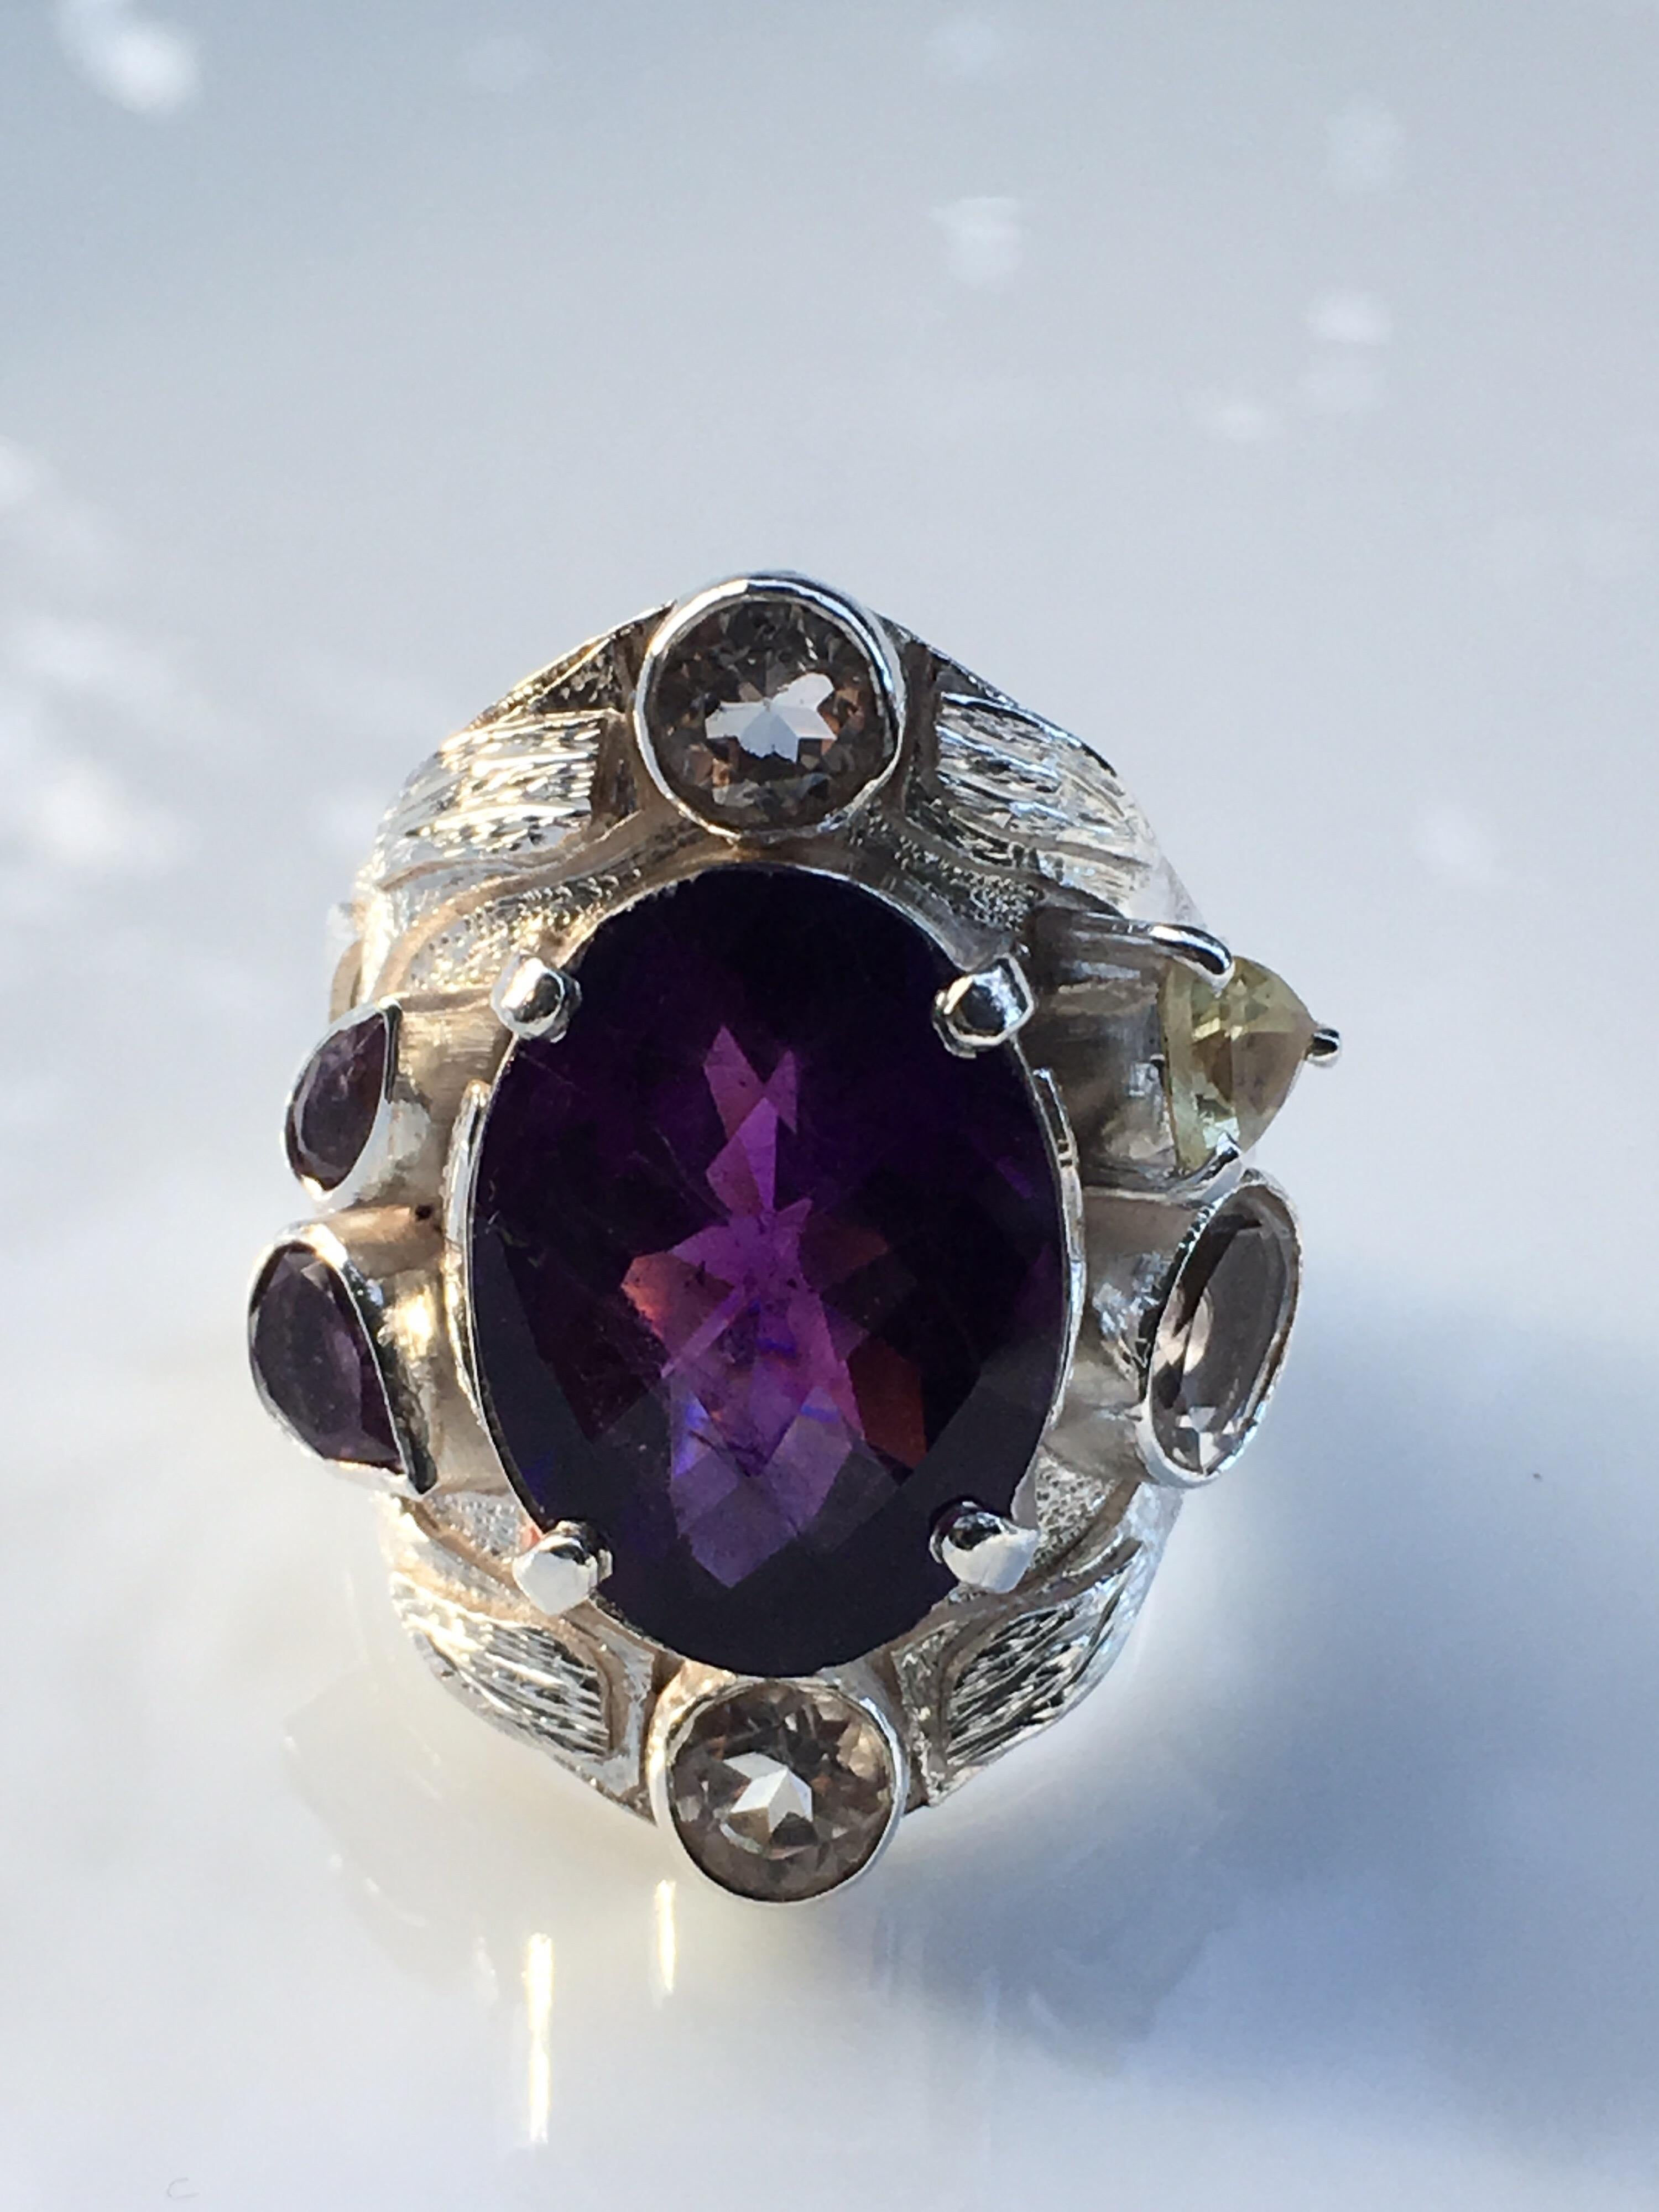 Natural 12 MM X 16 MM Oval double cut Amethyst is one of a kind handcrafted cocktail ring. Other stones are rock crystal Lemon Quartz, and light Amethyst. Ring size is 8 and can be resized. Total weight 16.86 Carat Gram. Approx total stones 14